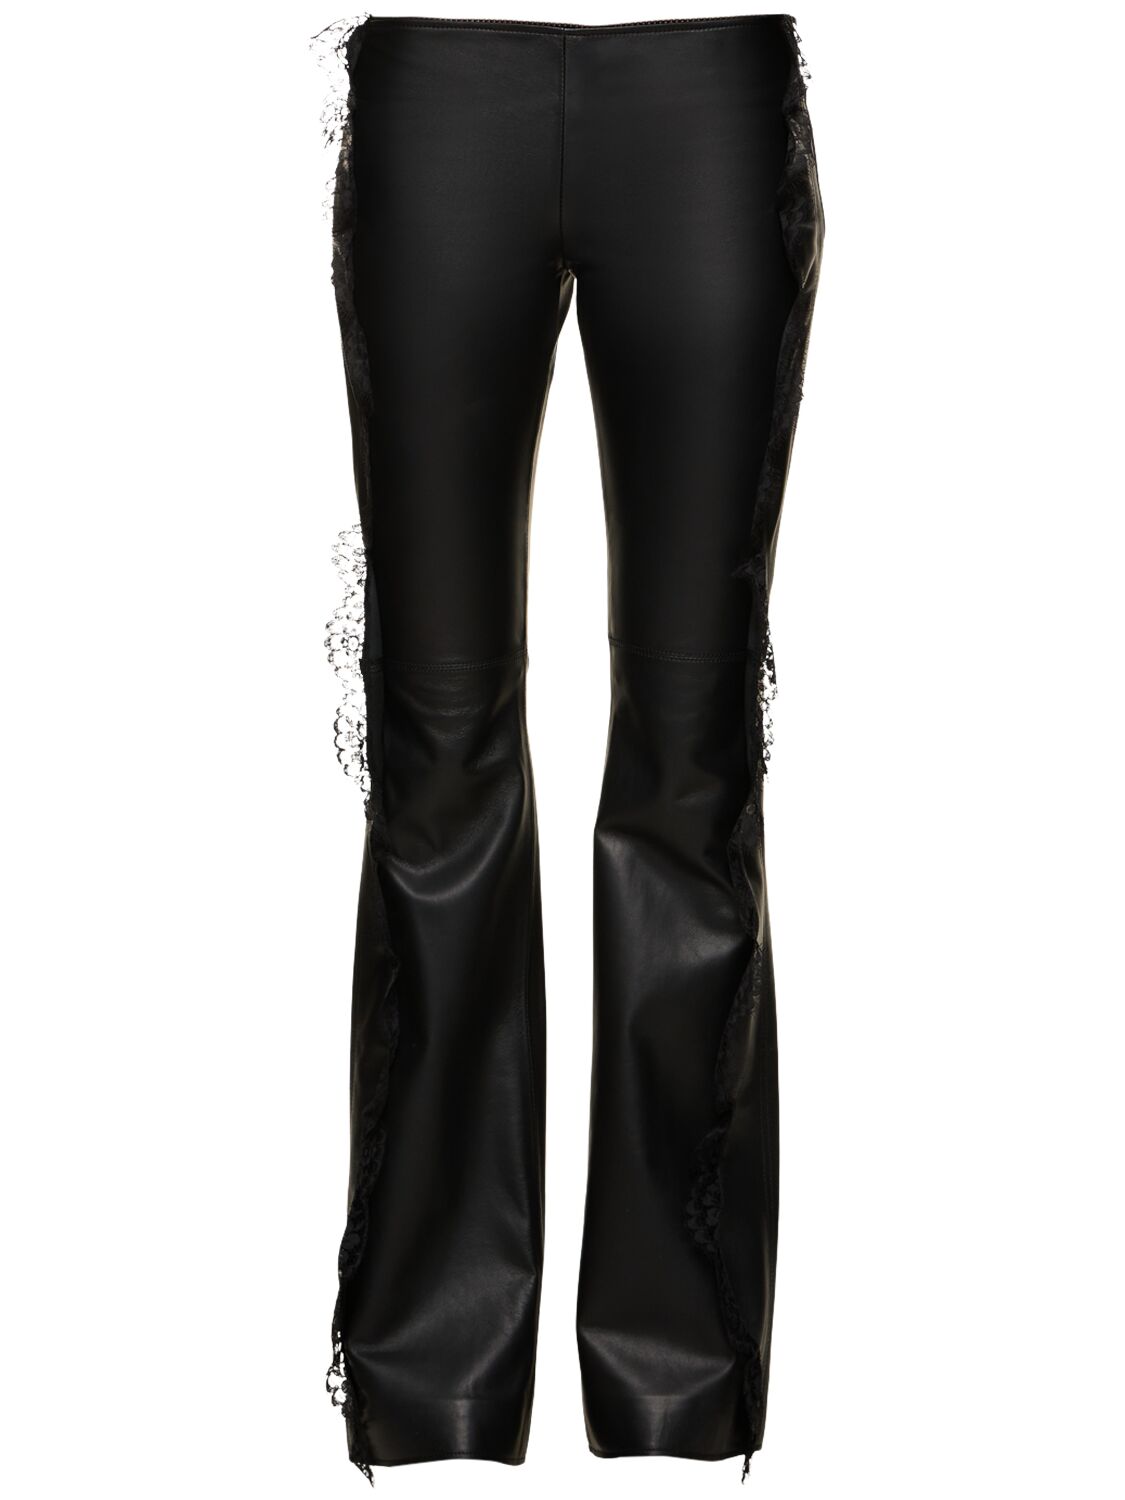 Image of Napa Leather Pants W/lace